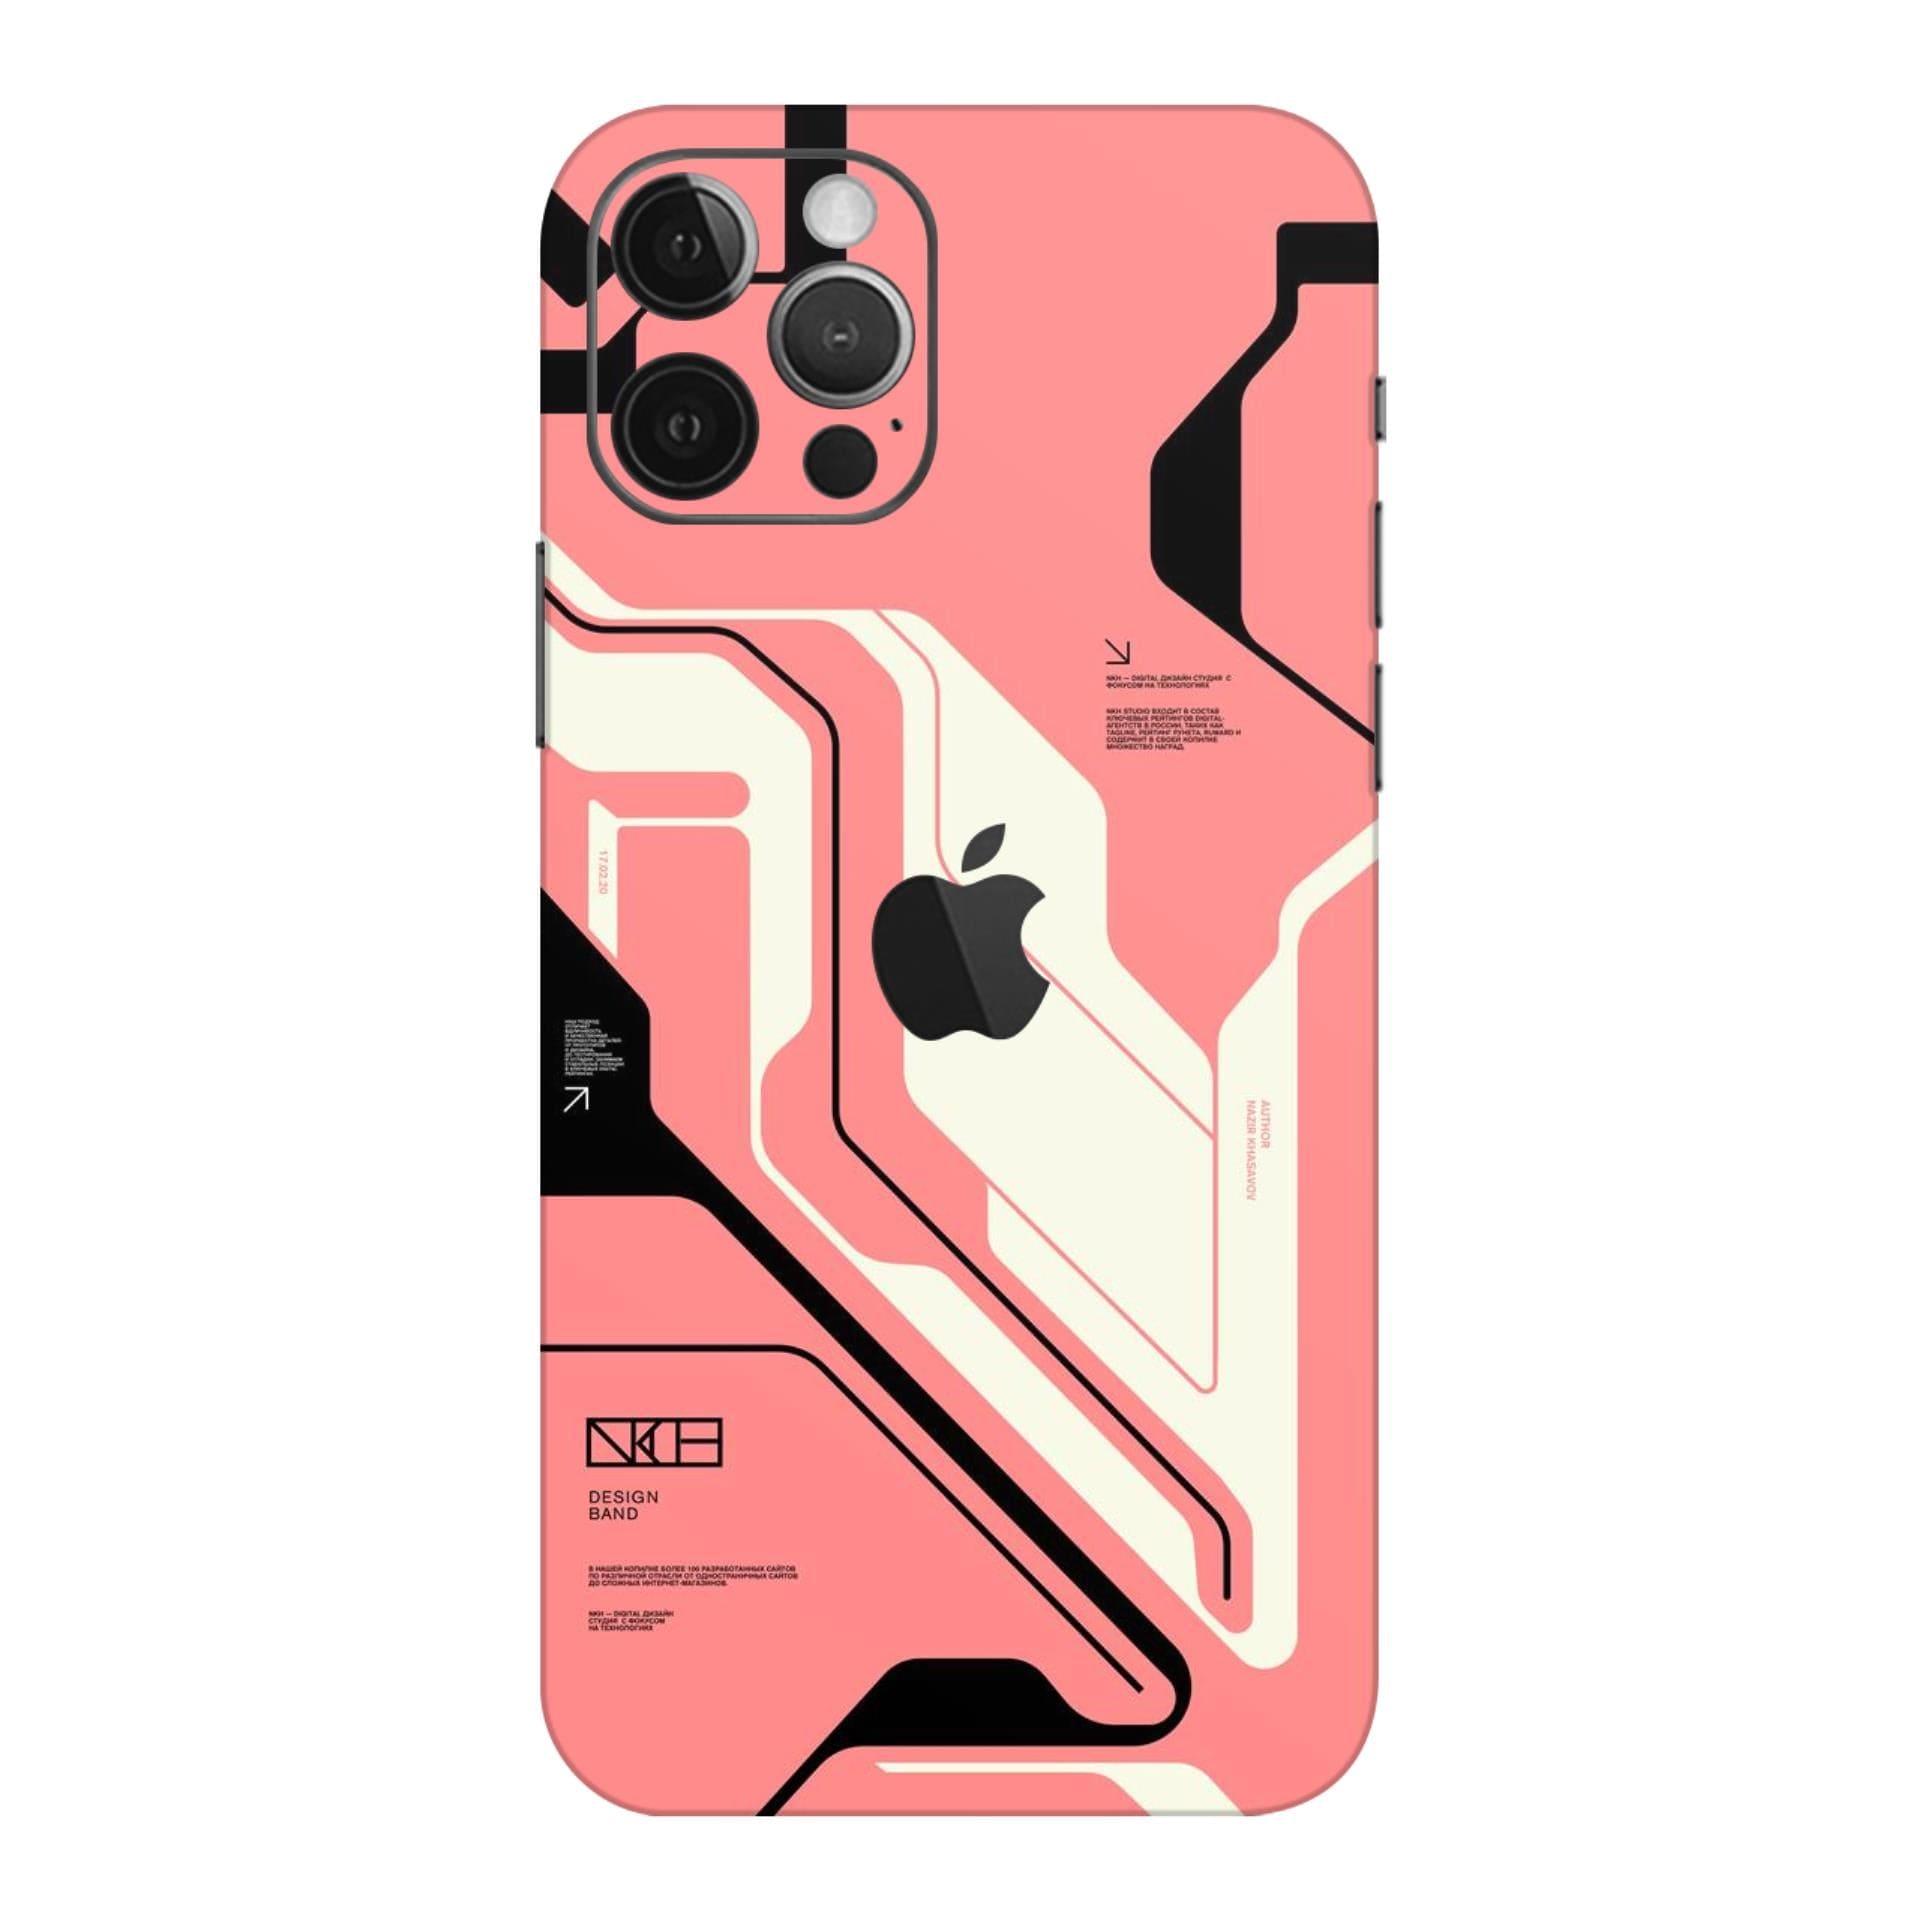 iphone 12 Pro Max Cyber pink skins